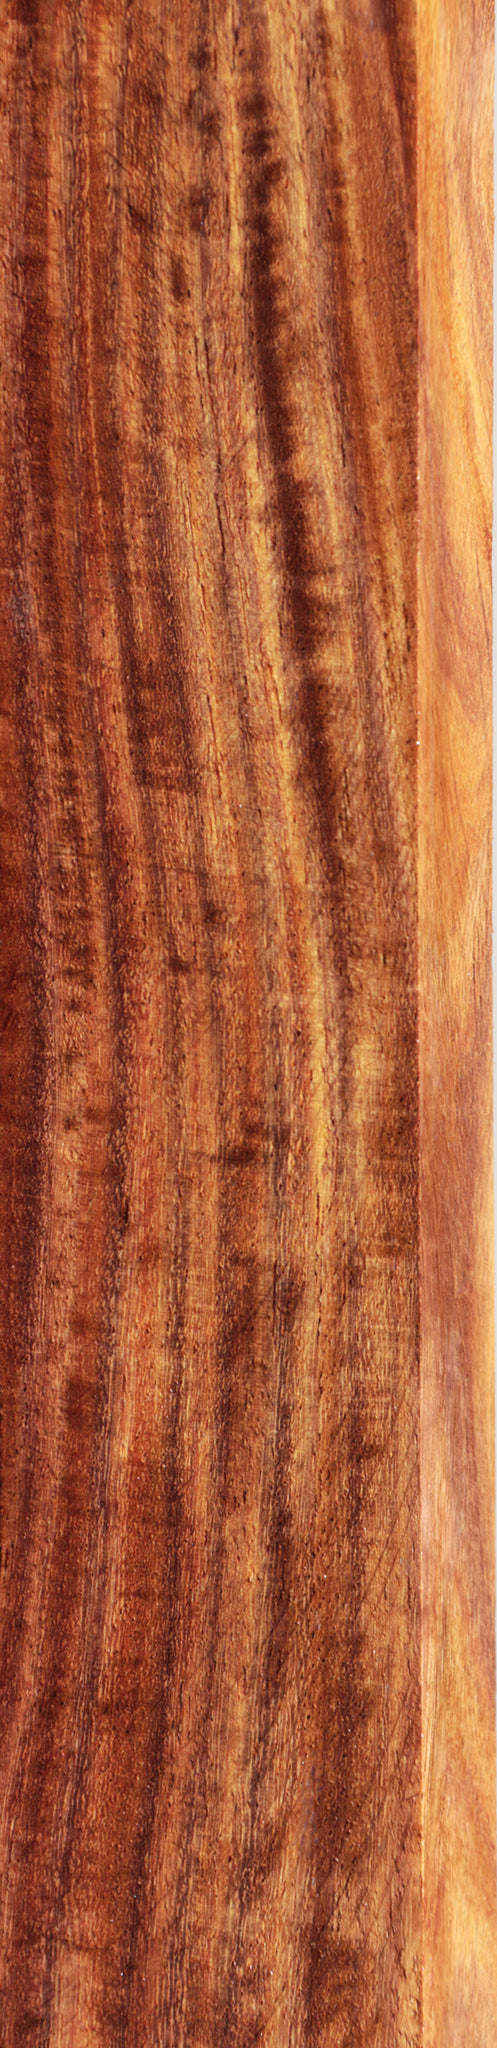 Extra Fancy East Indian Rosewood Lumber